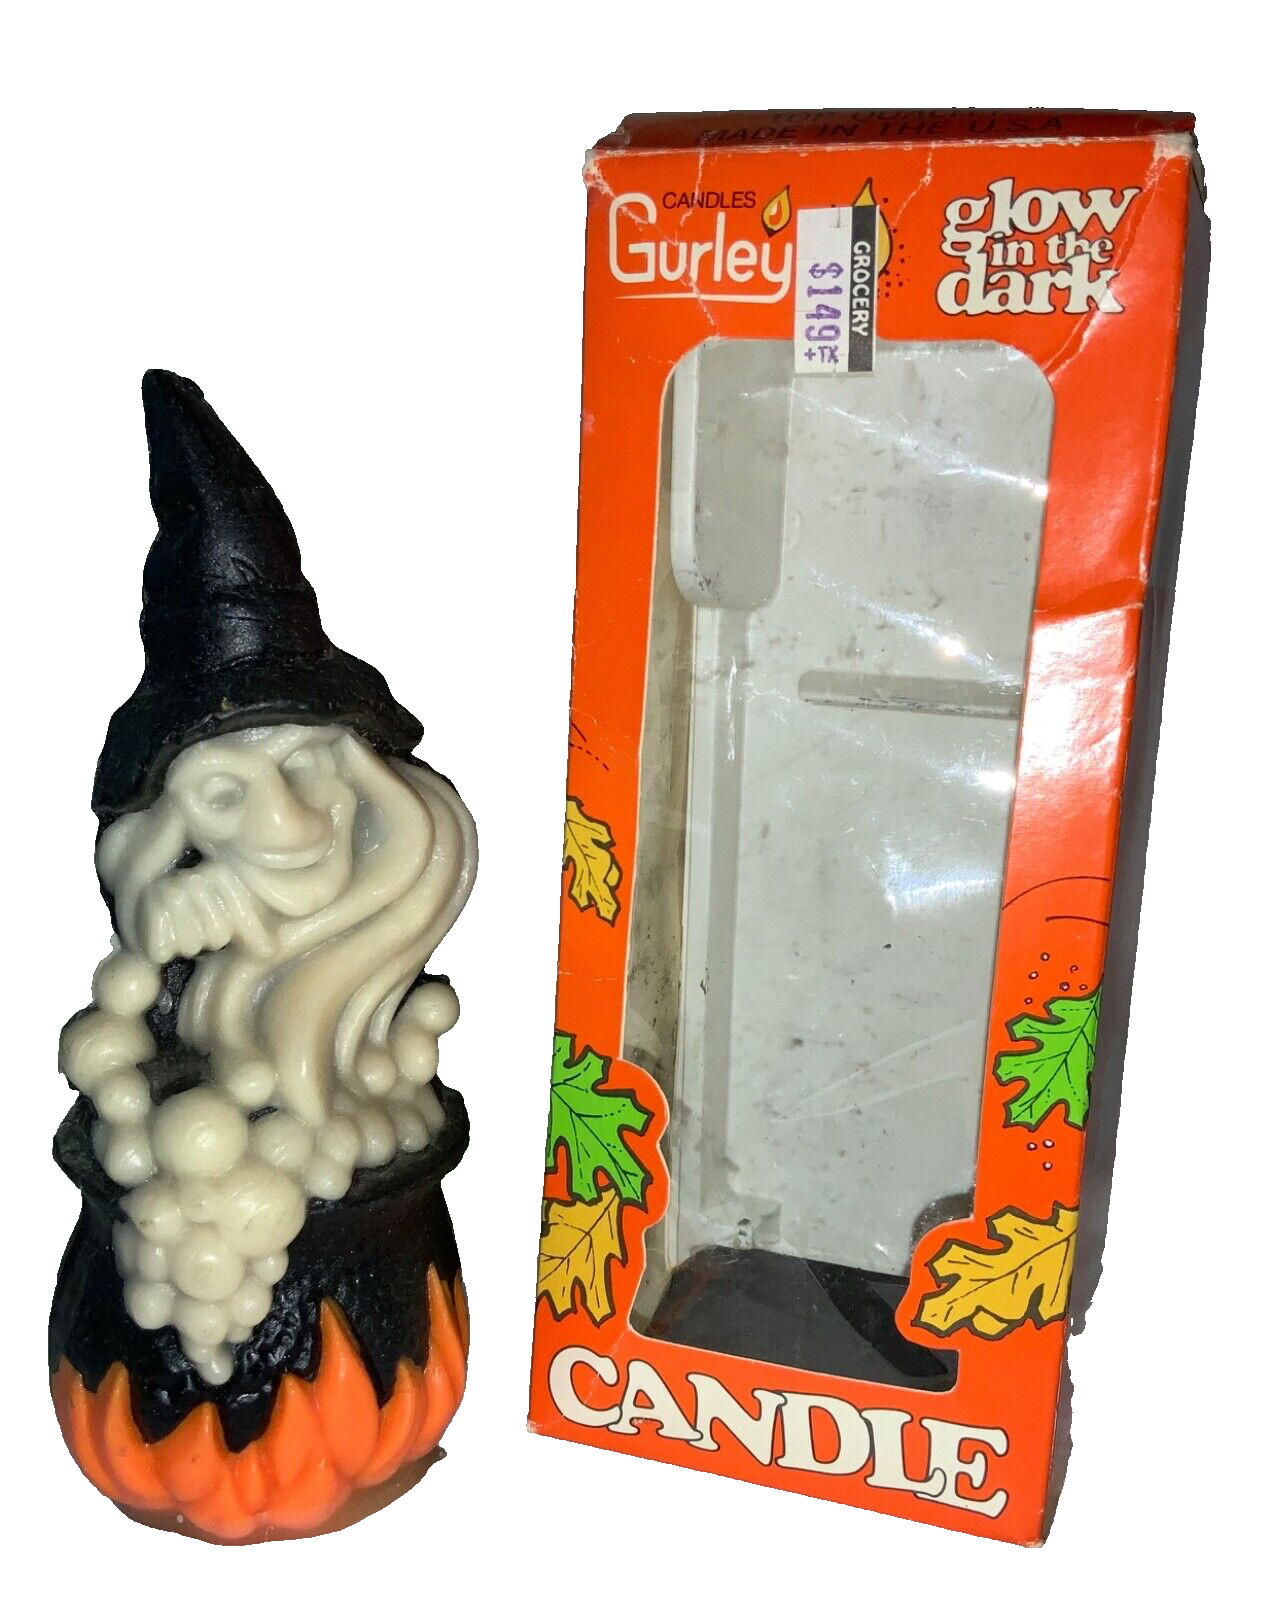 VINTAGE HALLOWEEN GURLEY CANDLE - GLOW-IN-THE-DARK WITCH WITH CAULDRON